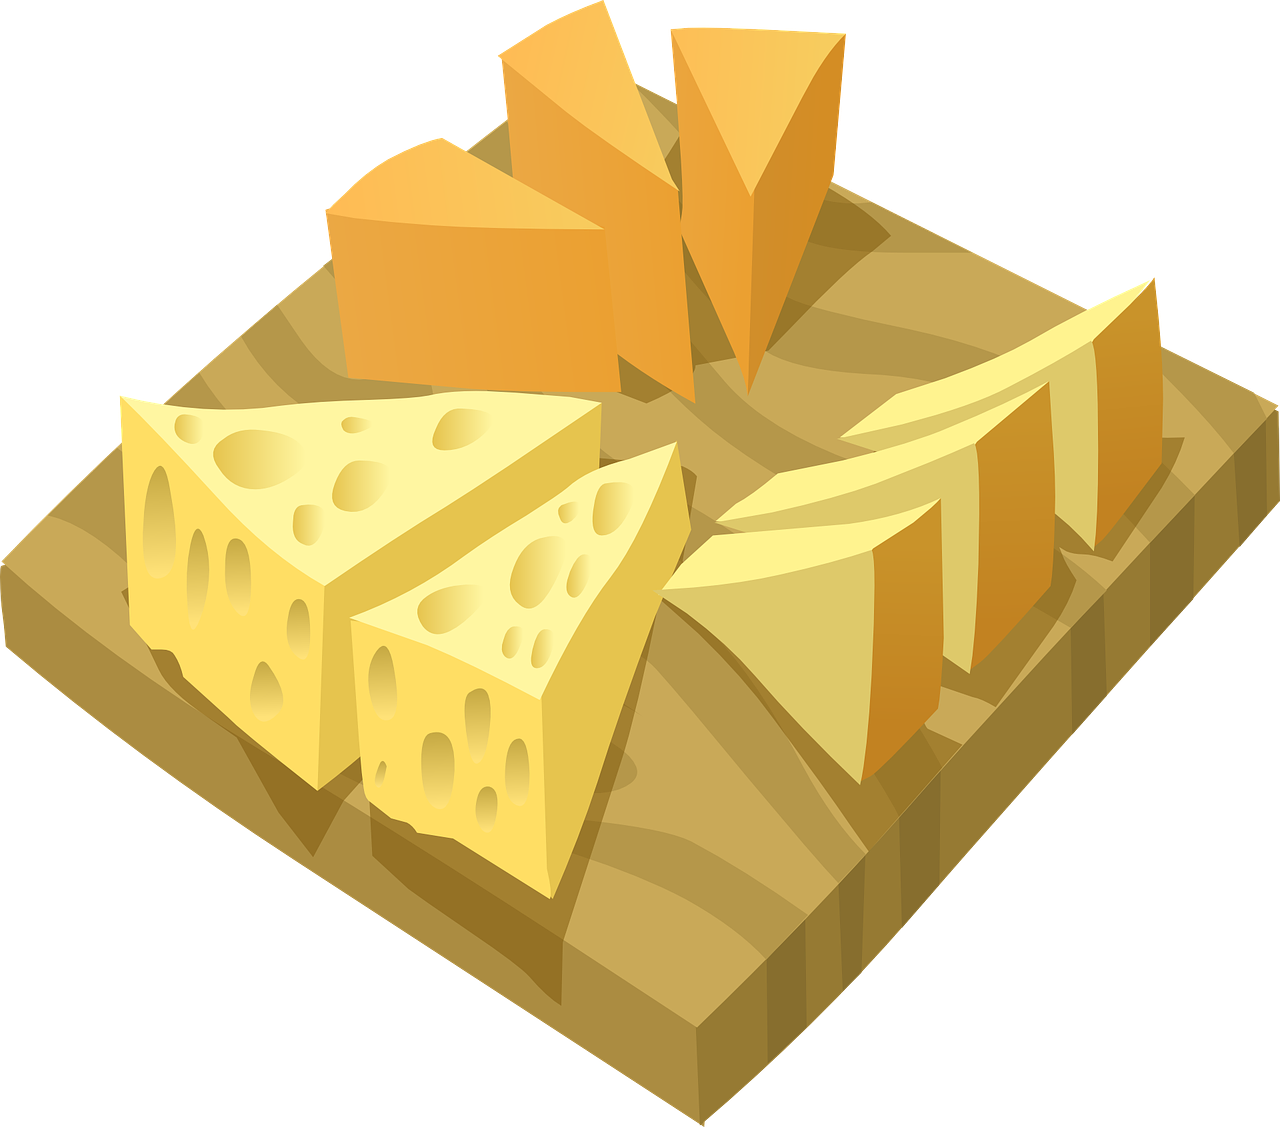 swiss-cheese-575541_1280.png